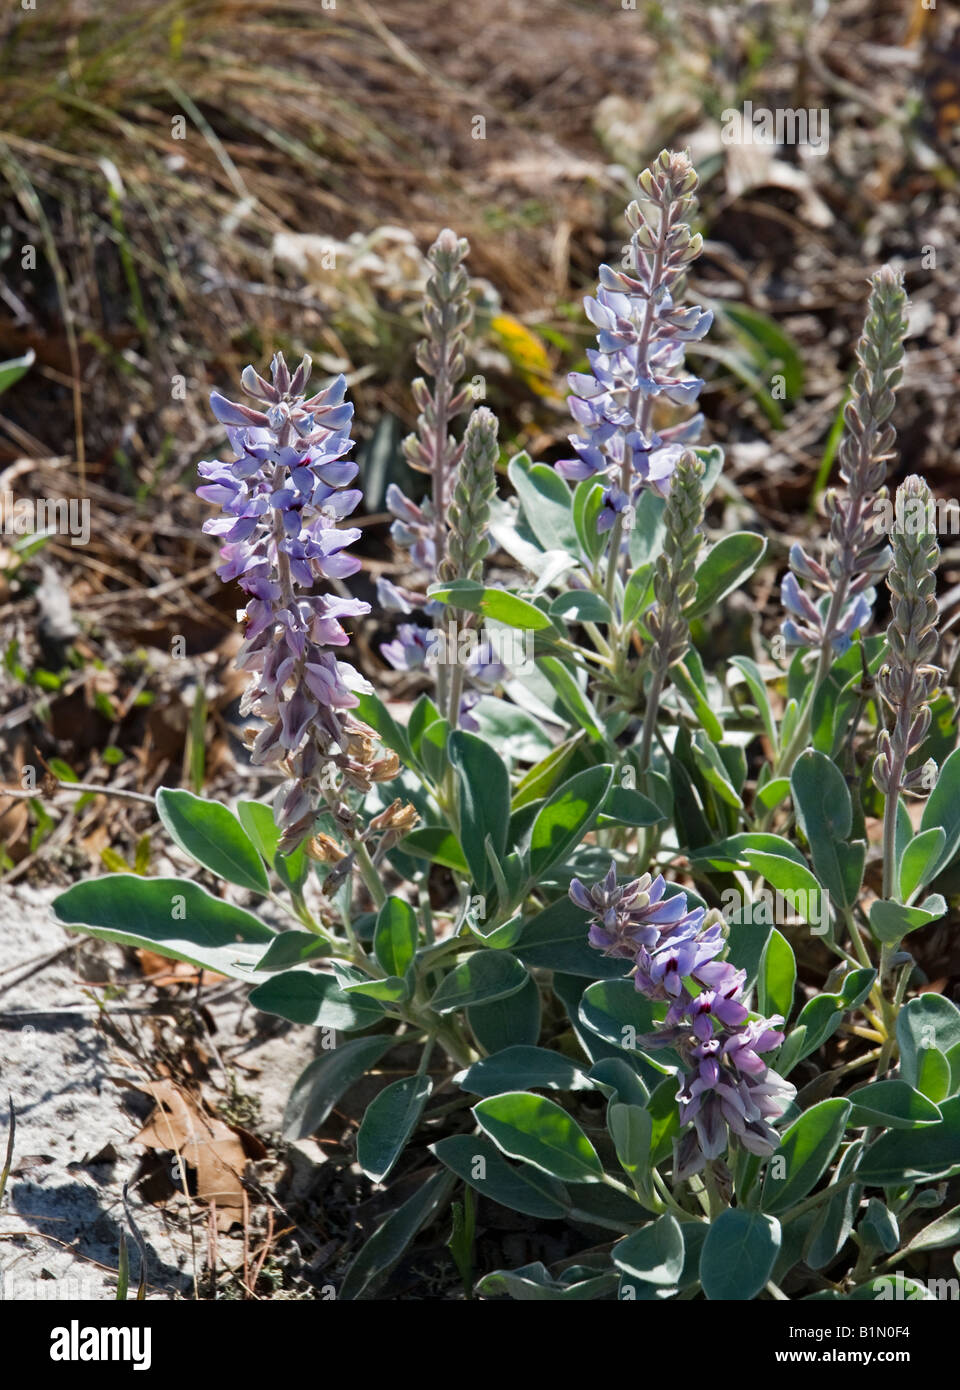 Lupine in bloom along the High Bluff Coastal Hiking Trail at Tate s Hell State Forest North Florida Lupinus L Stock Photo